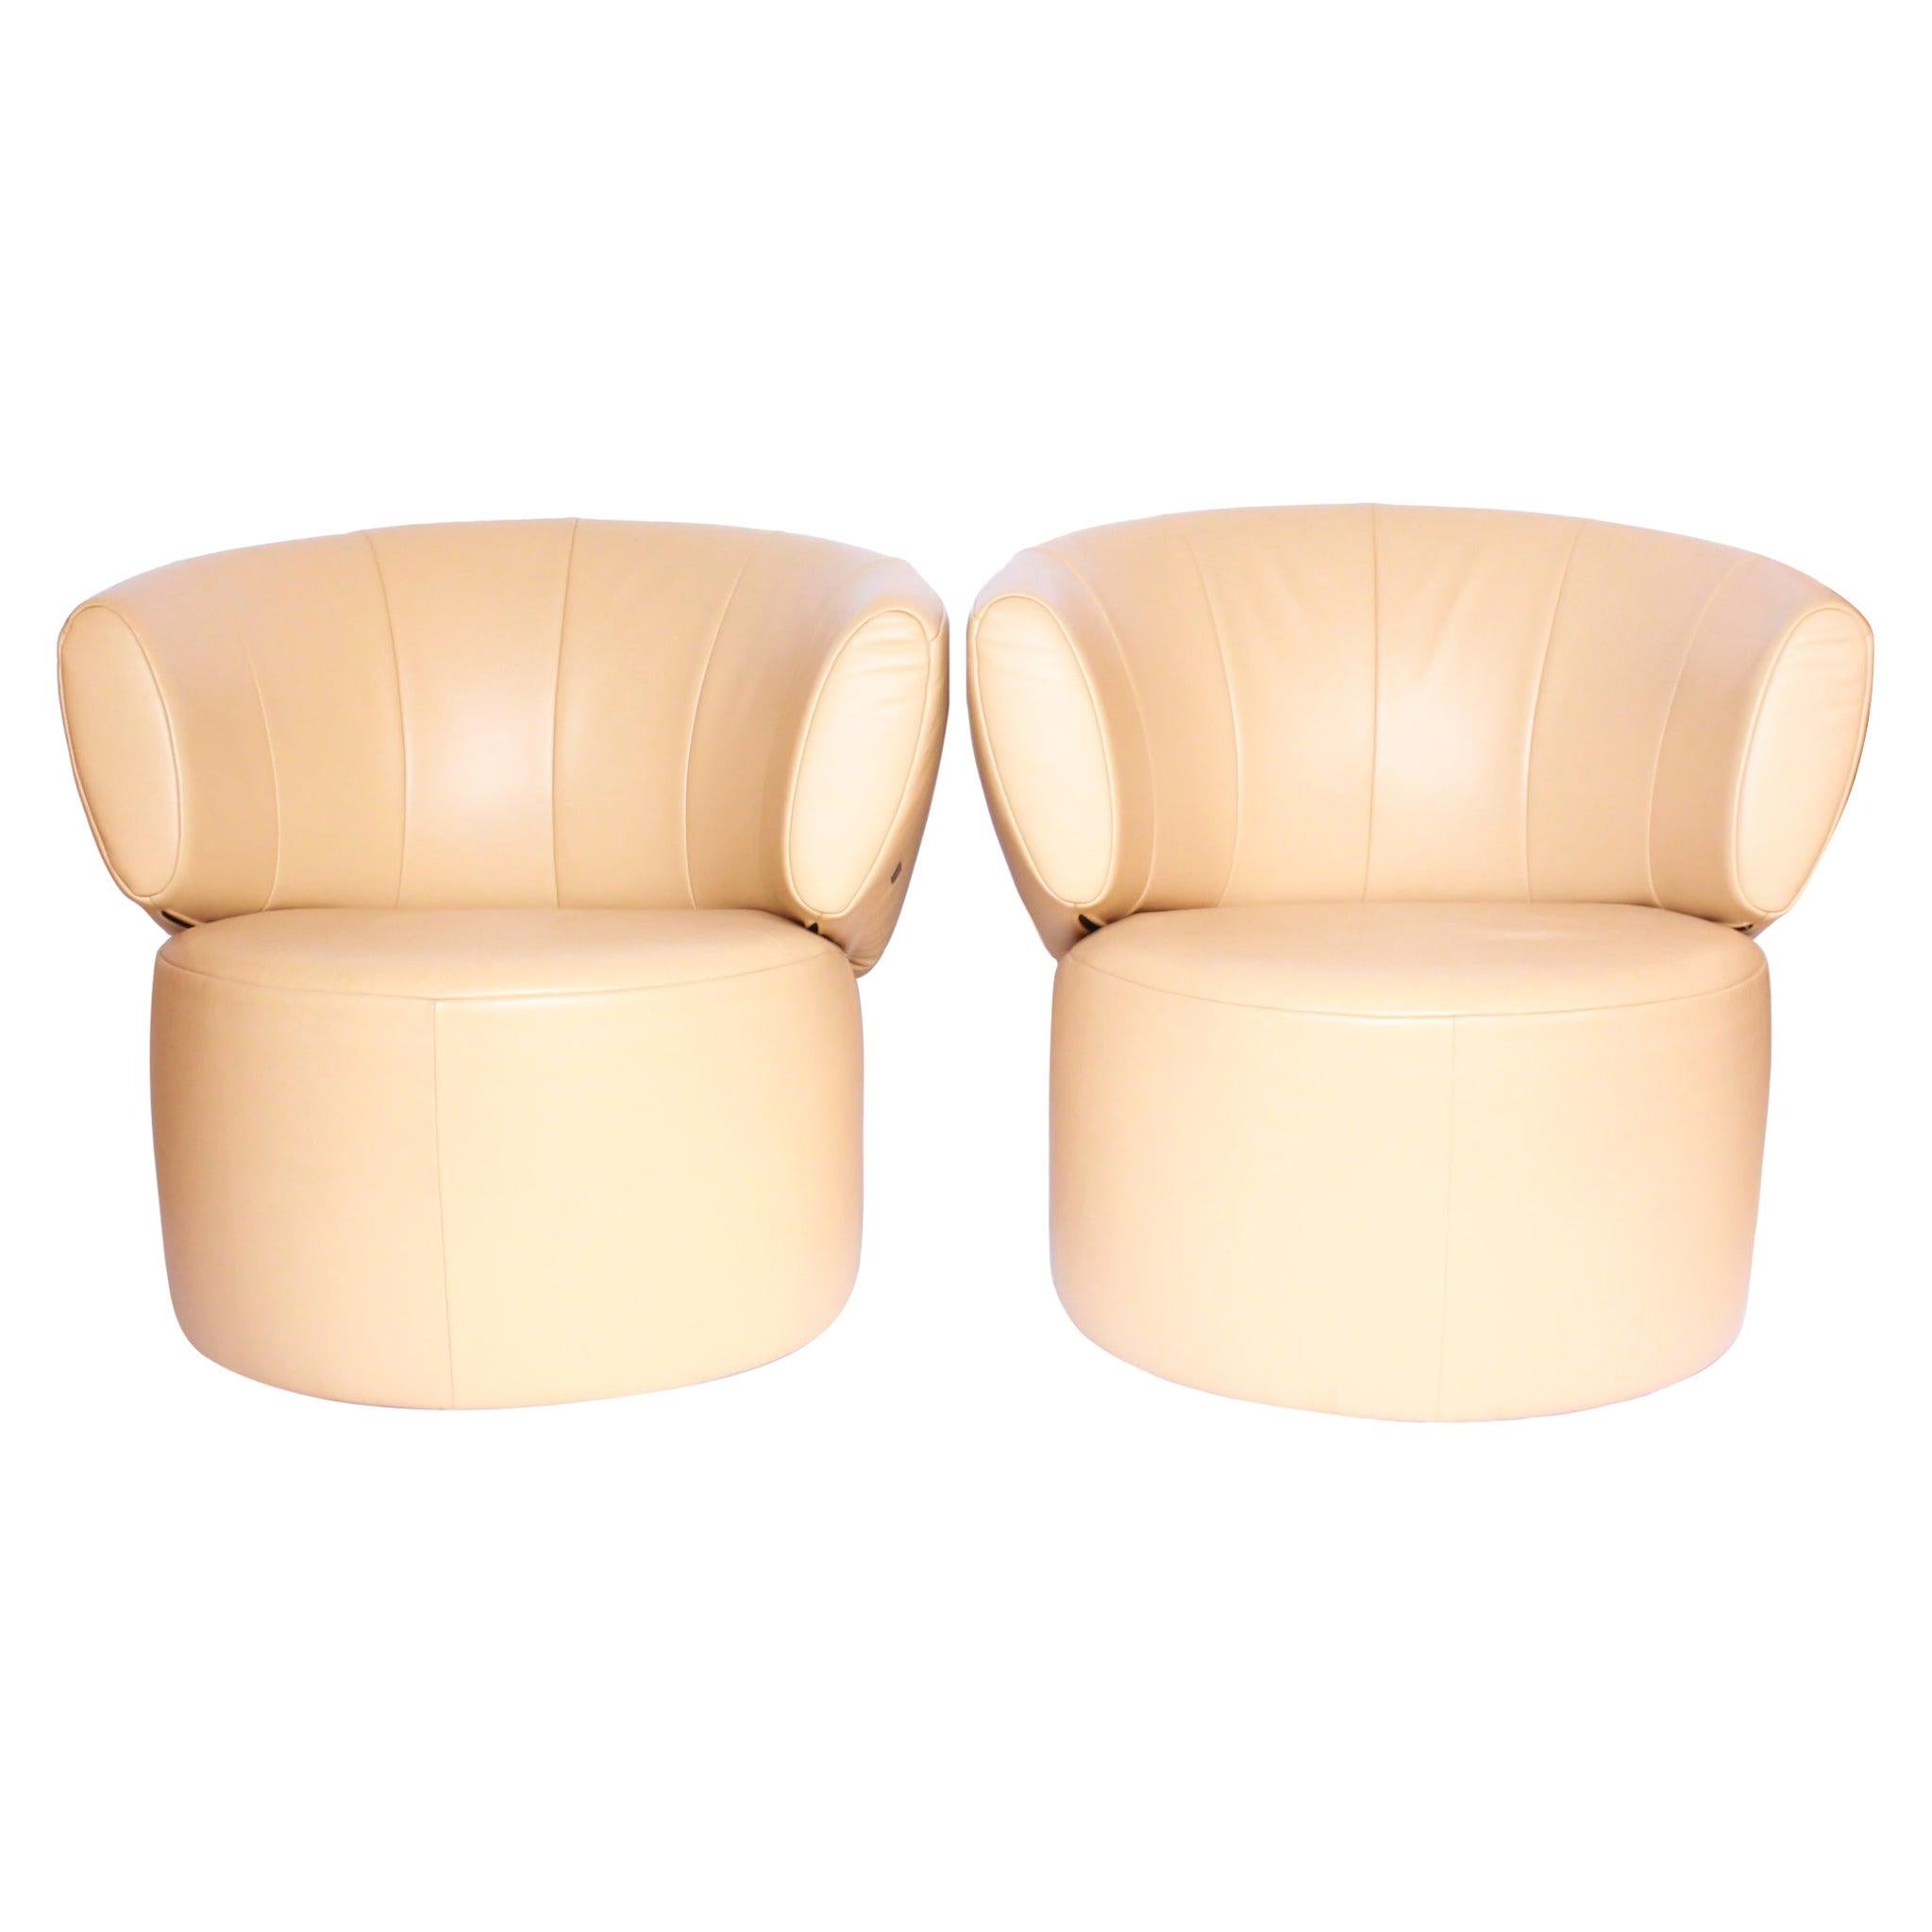 Pair of Rolf Benz 684 Armchairs Cream Leather Wooden Base Swivel Movement